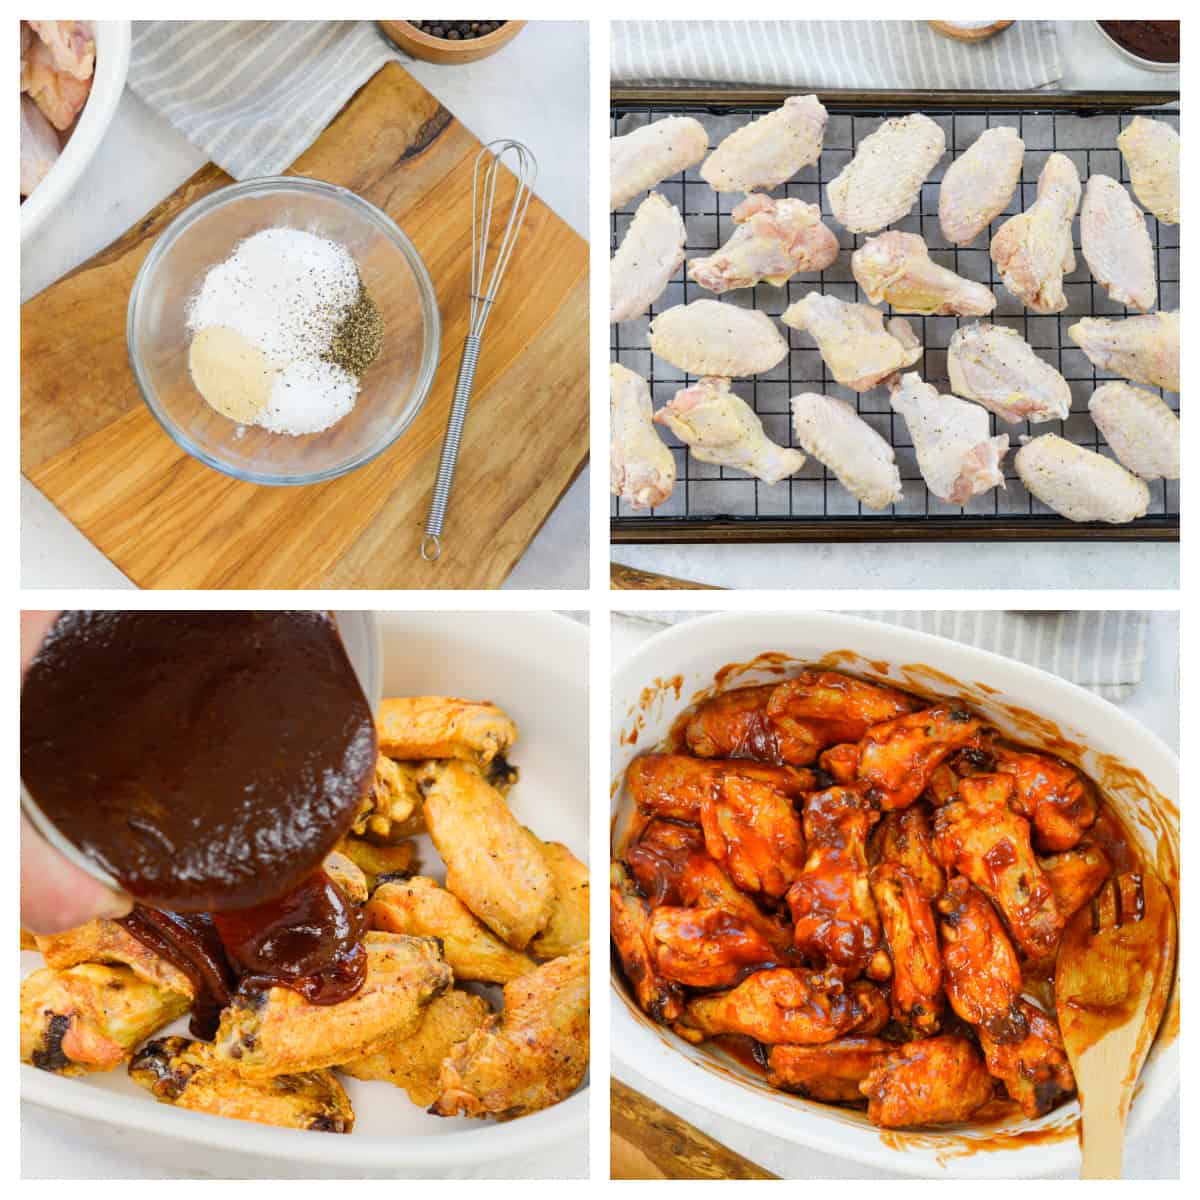 Collage showing how to make baked chicken wings with bbq sauce.